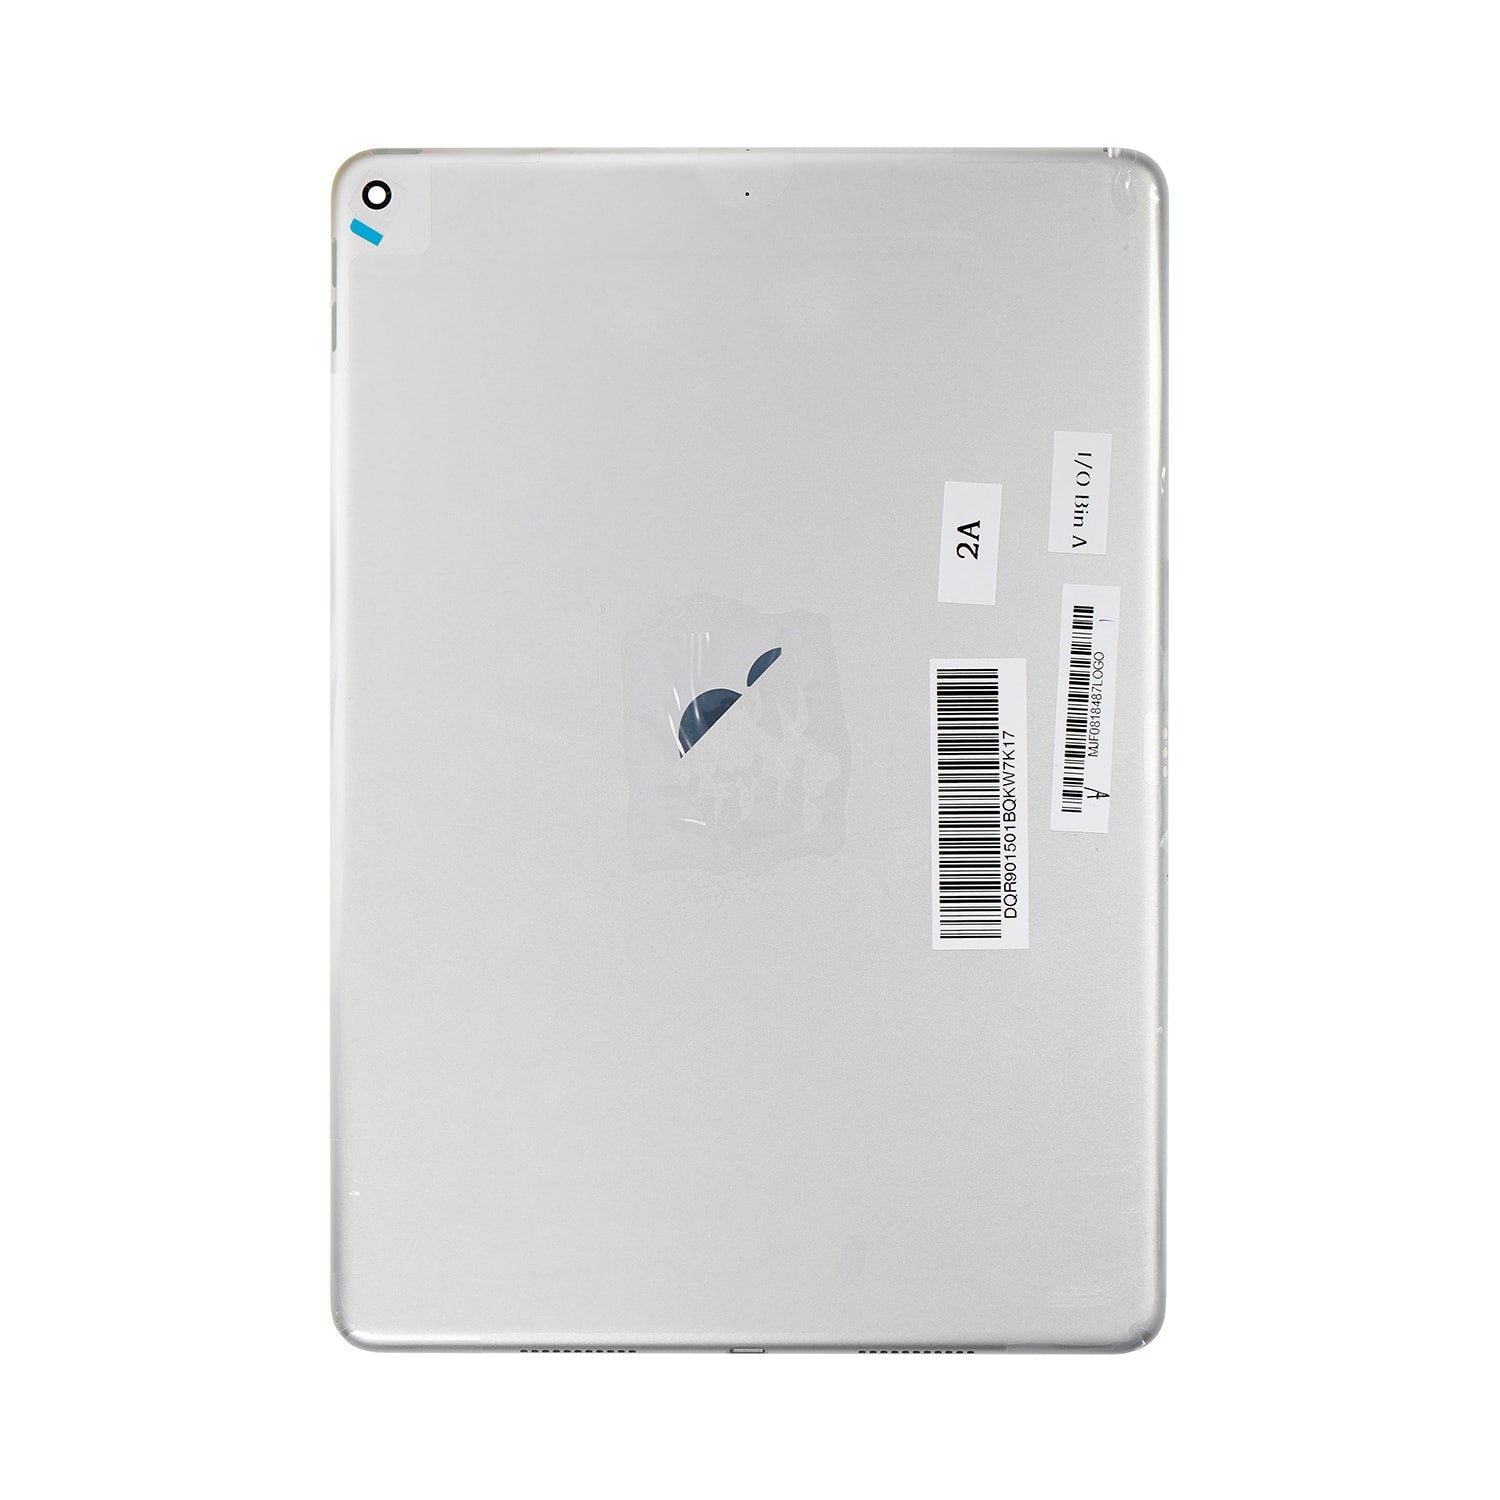 SILVER WIFI VERSION BACK COVER FOR IPAD AIR 3